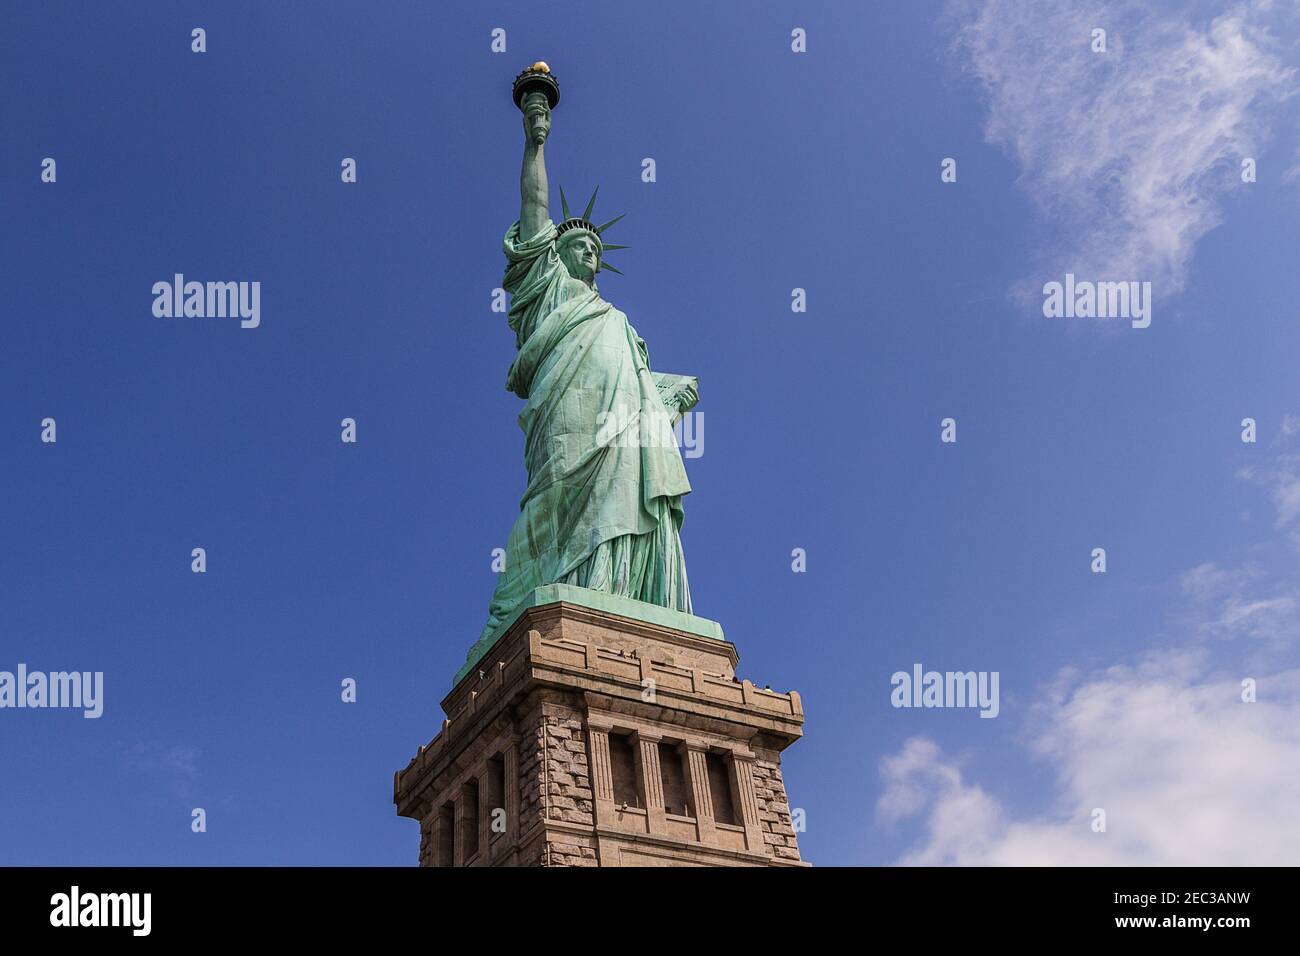 An image of the Statue of Liberty taken from below Stock Photo